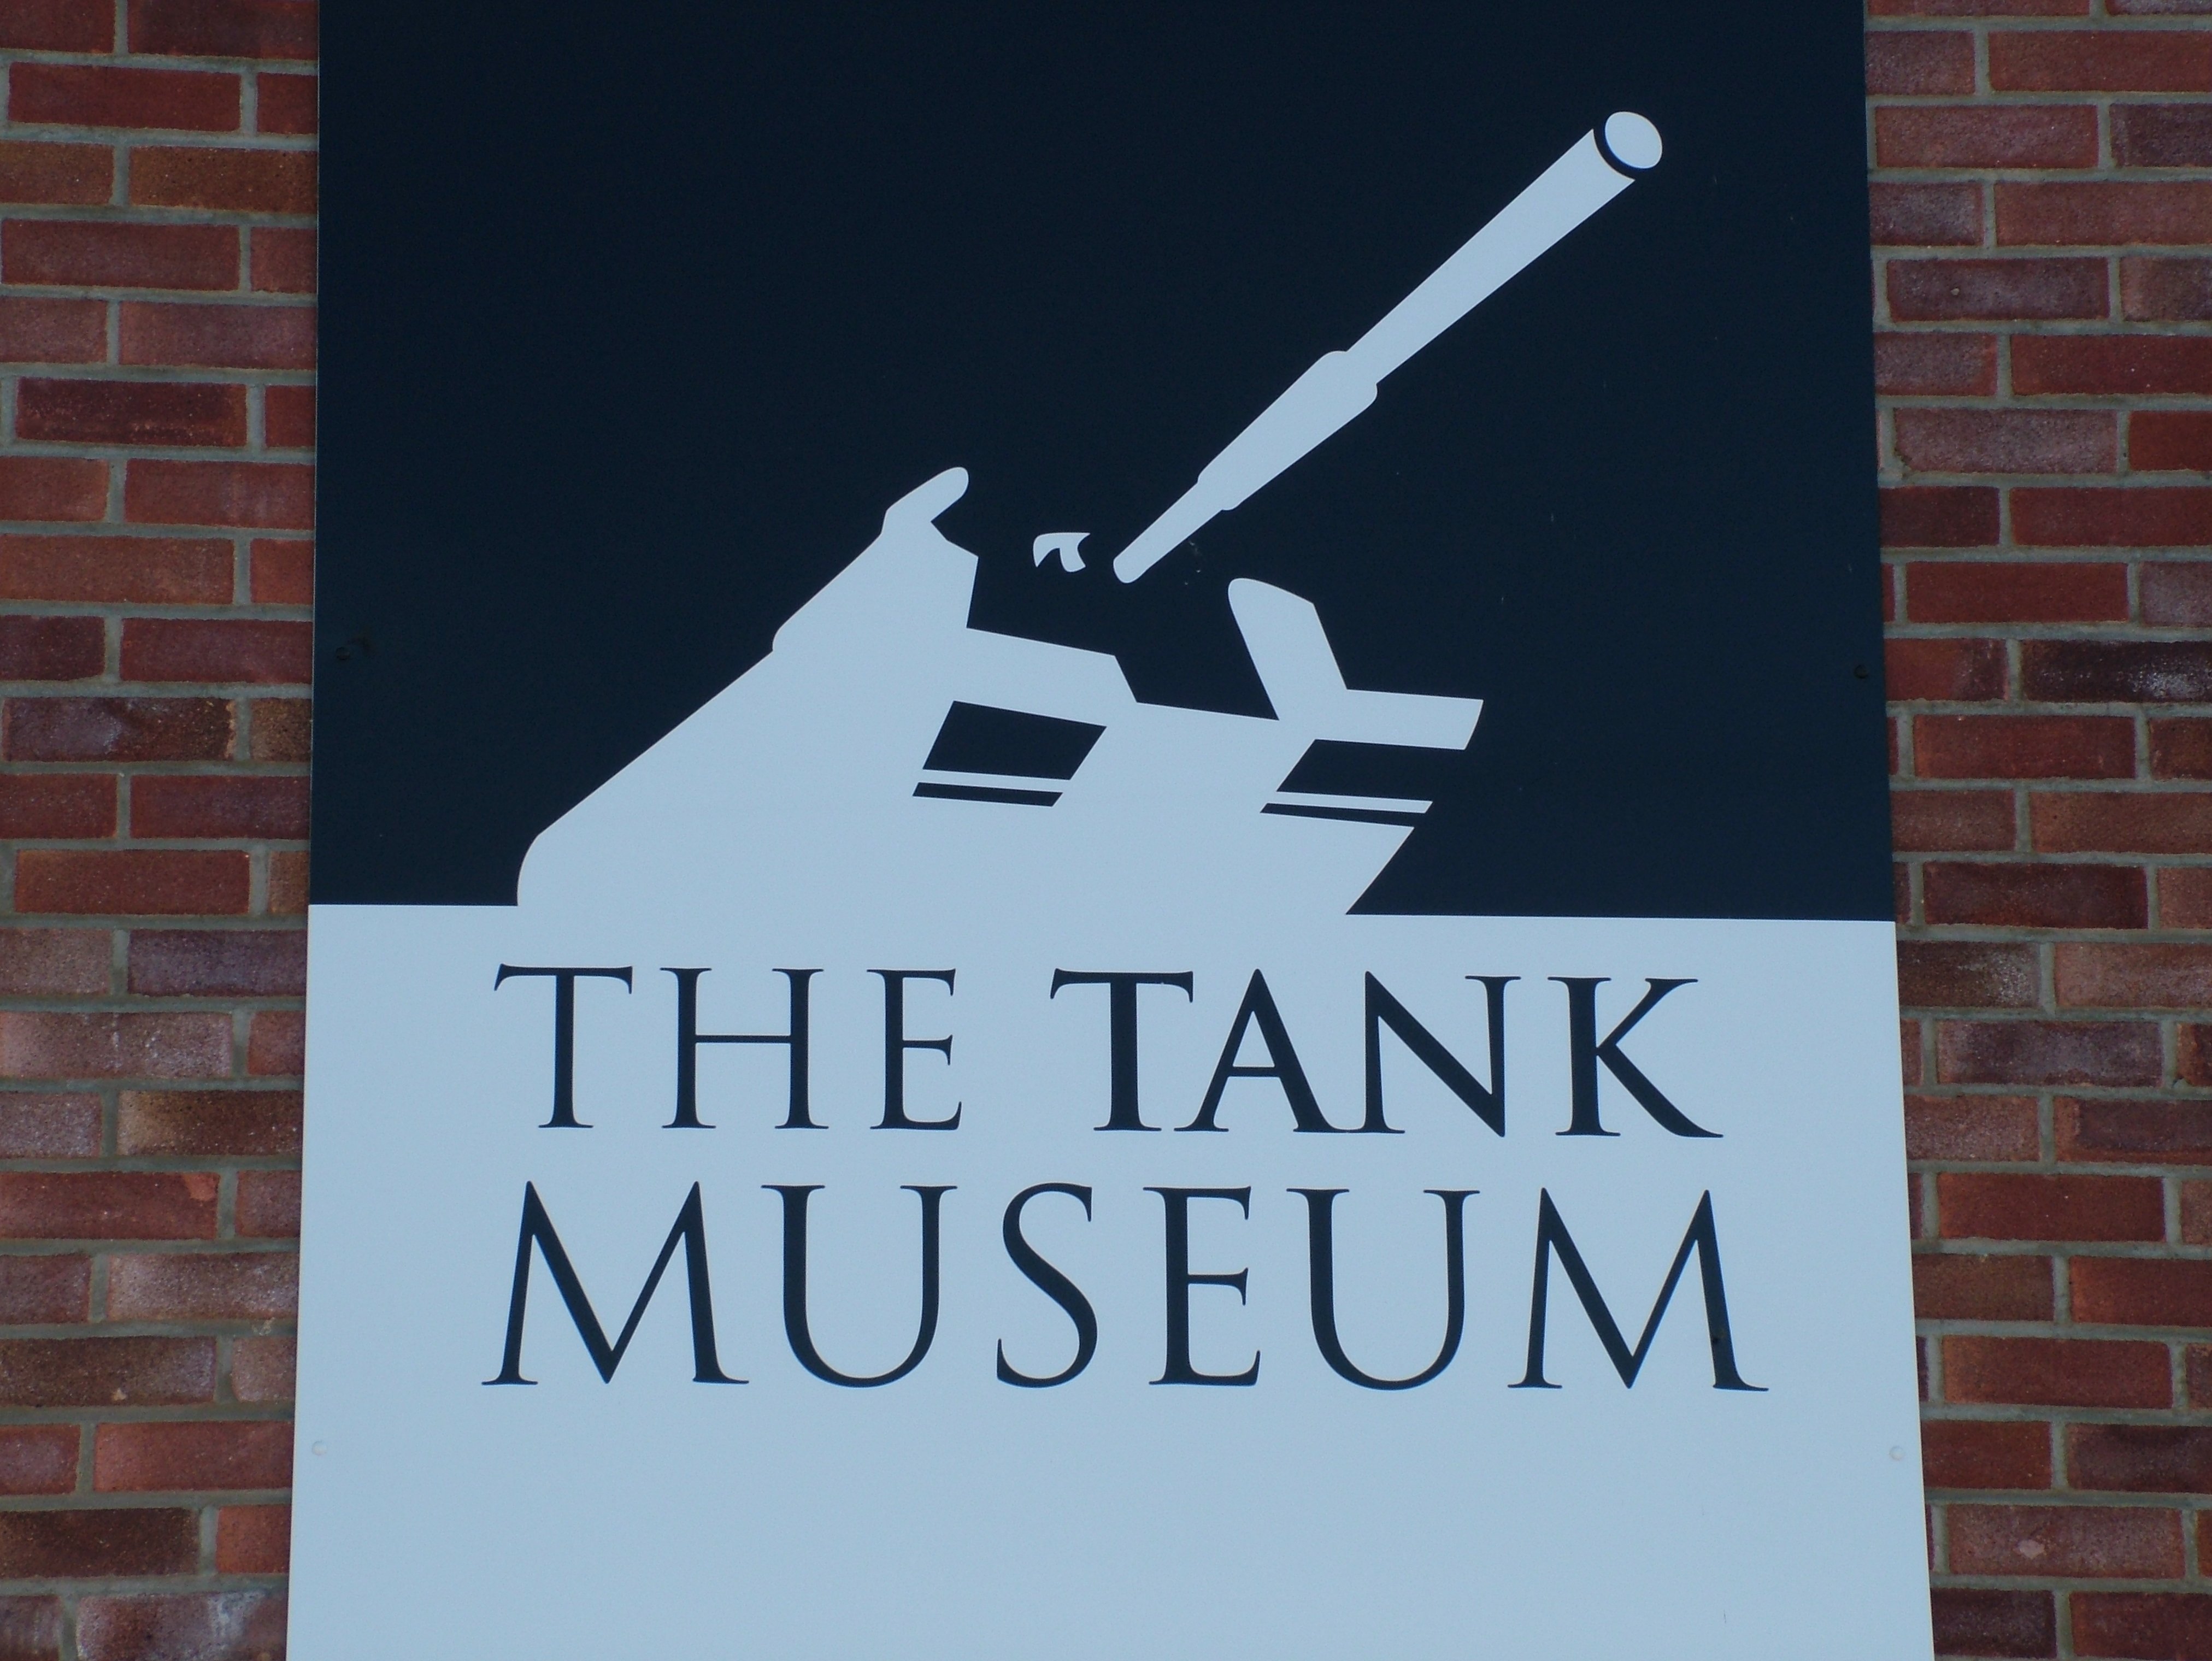 The Tank Museum sign